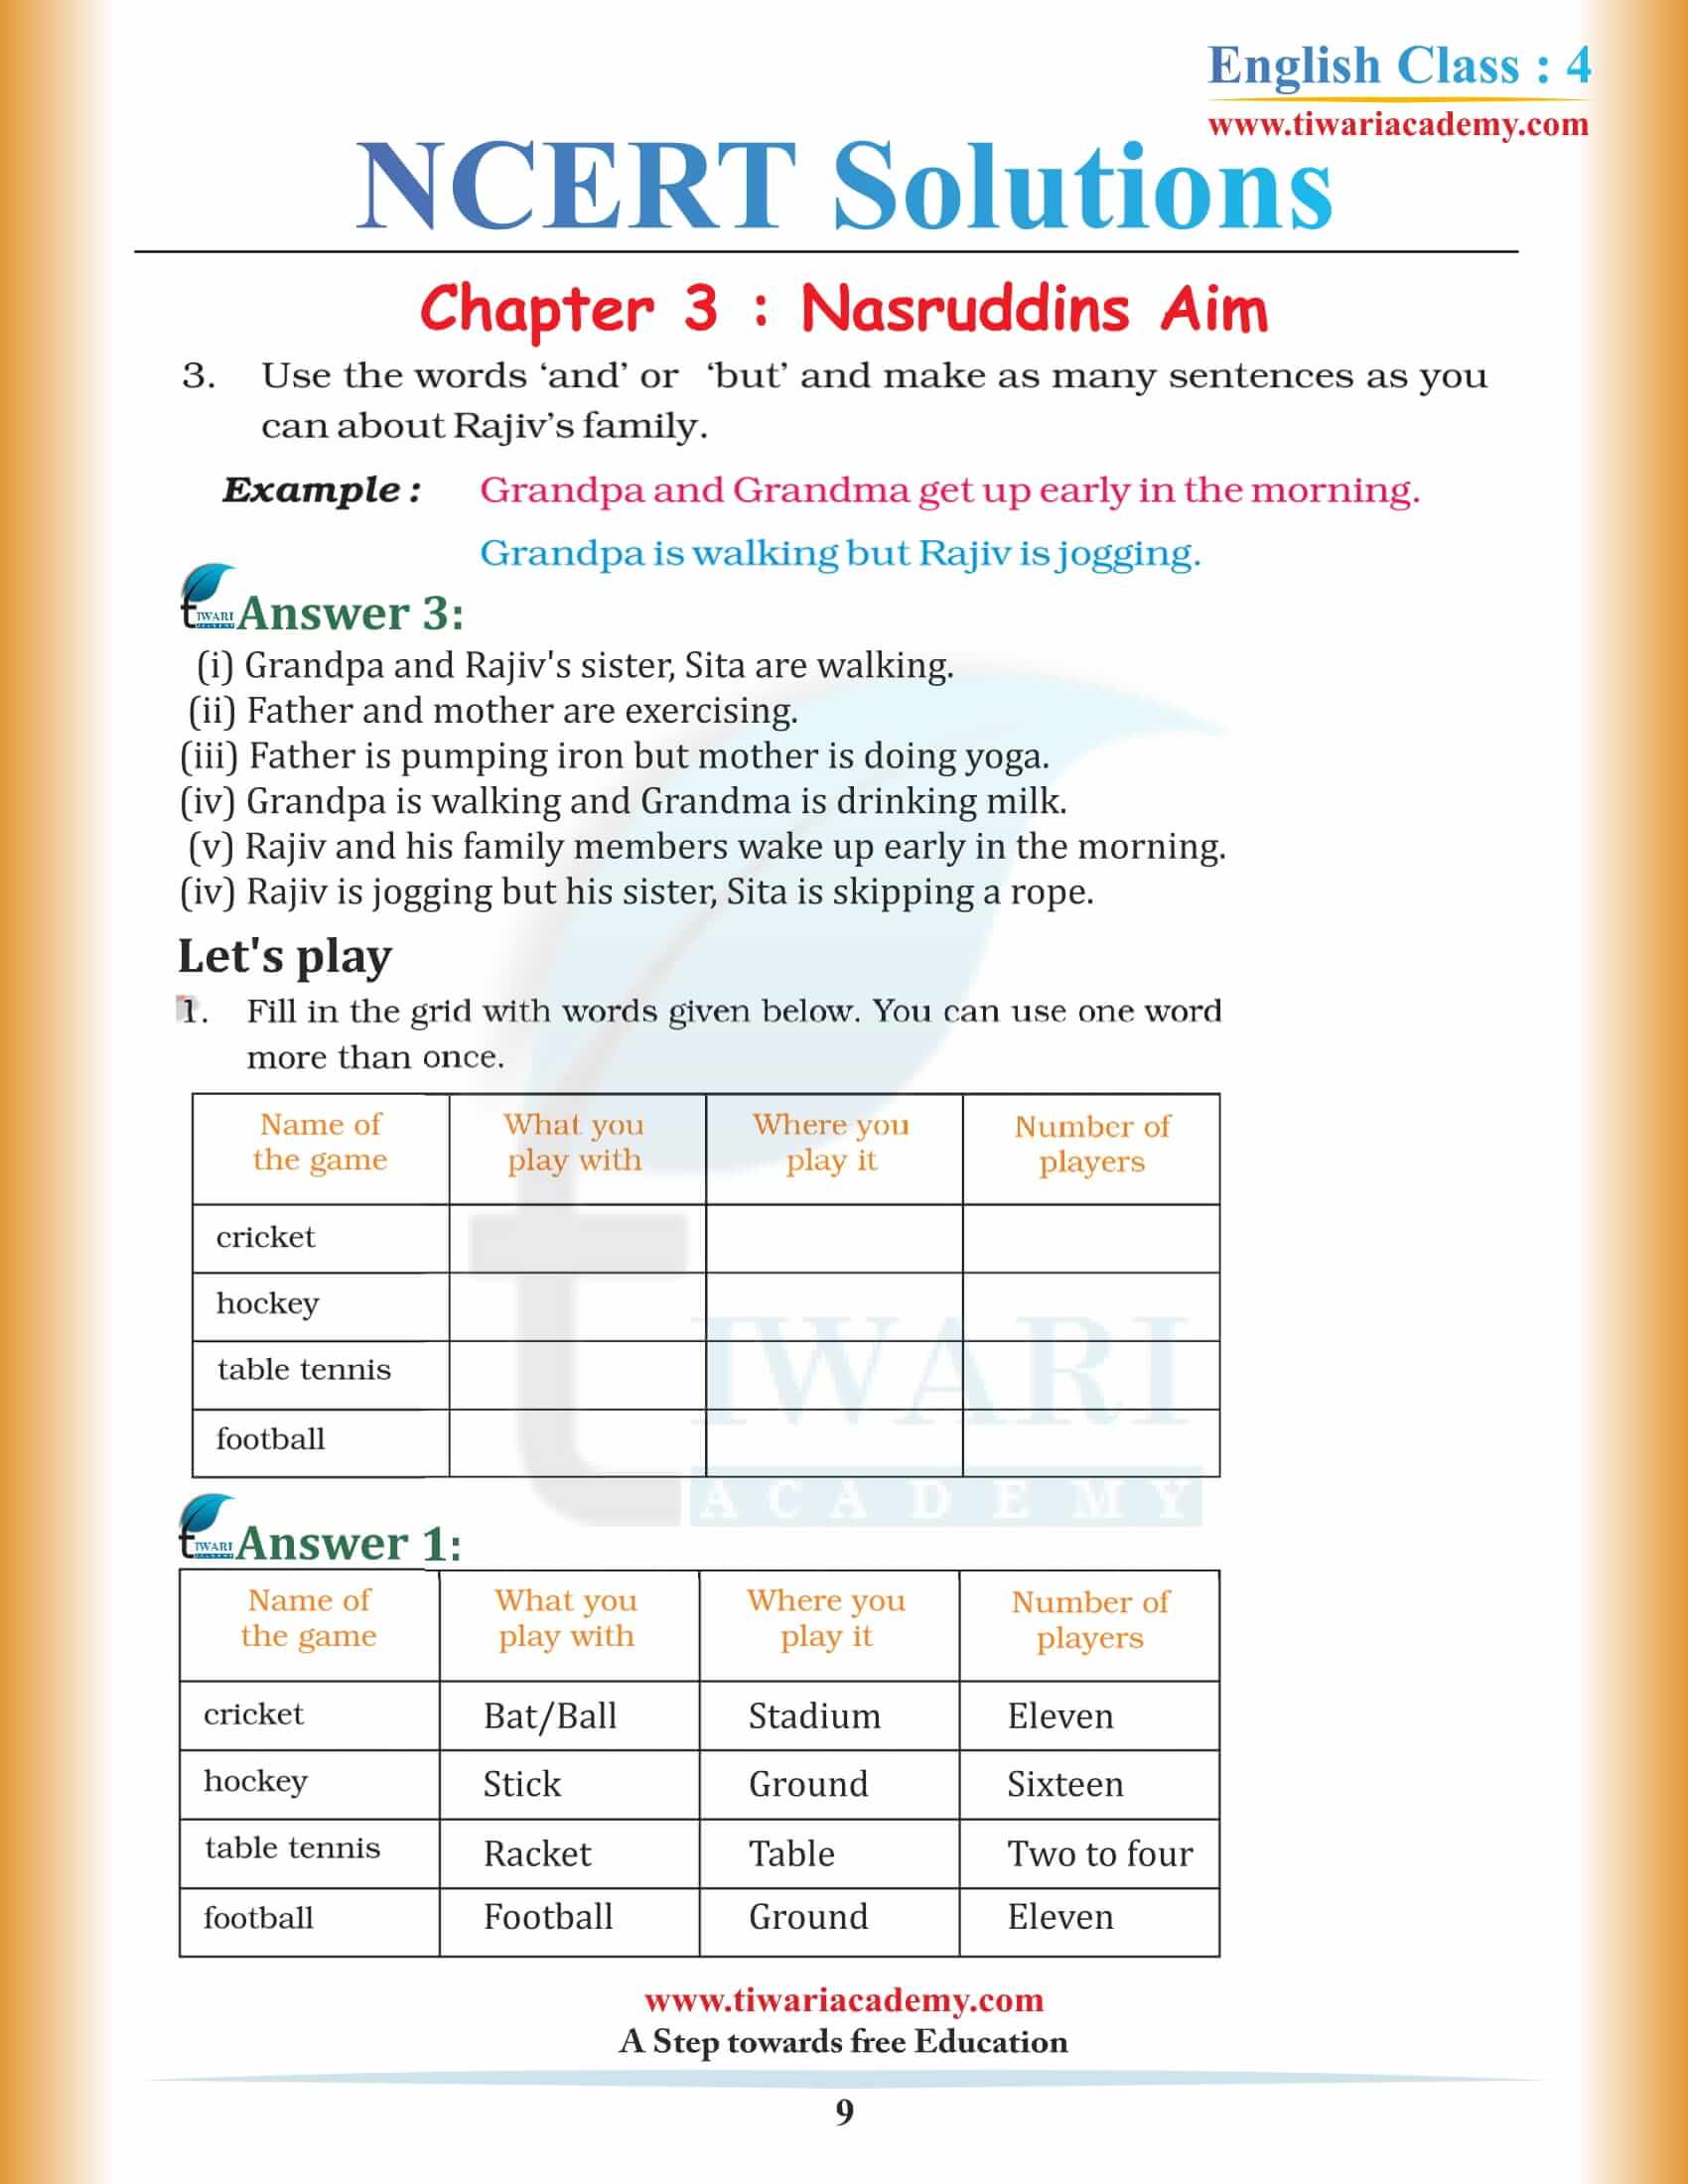 Class 4 English Unit 3 NCERT Solutions free download